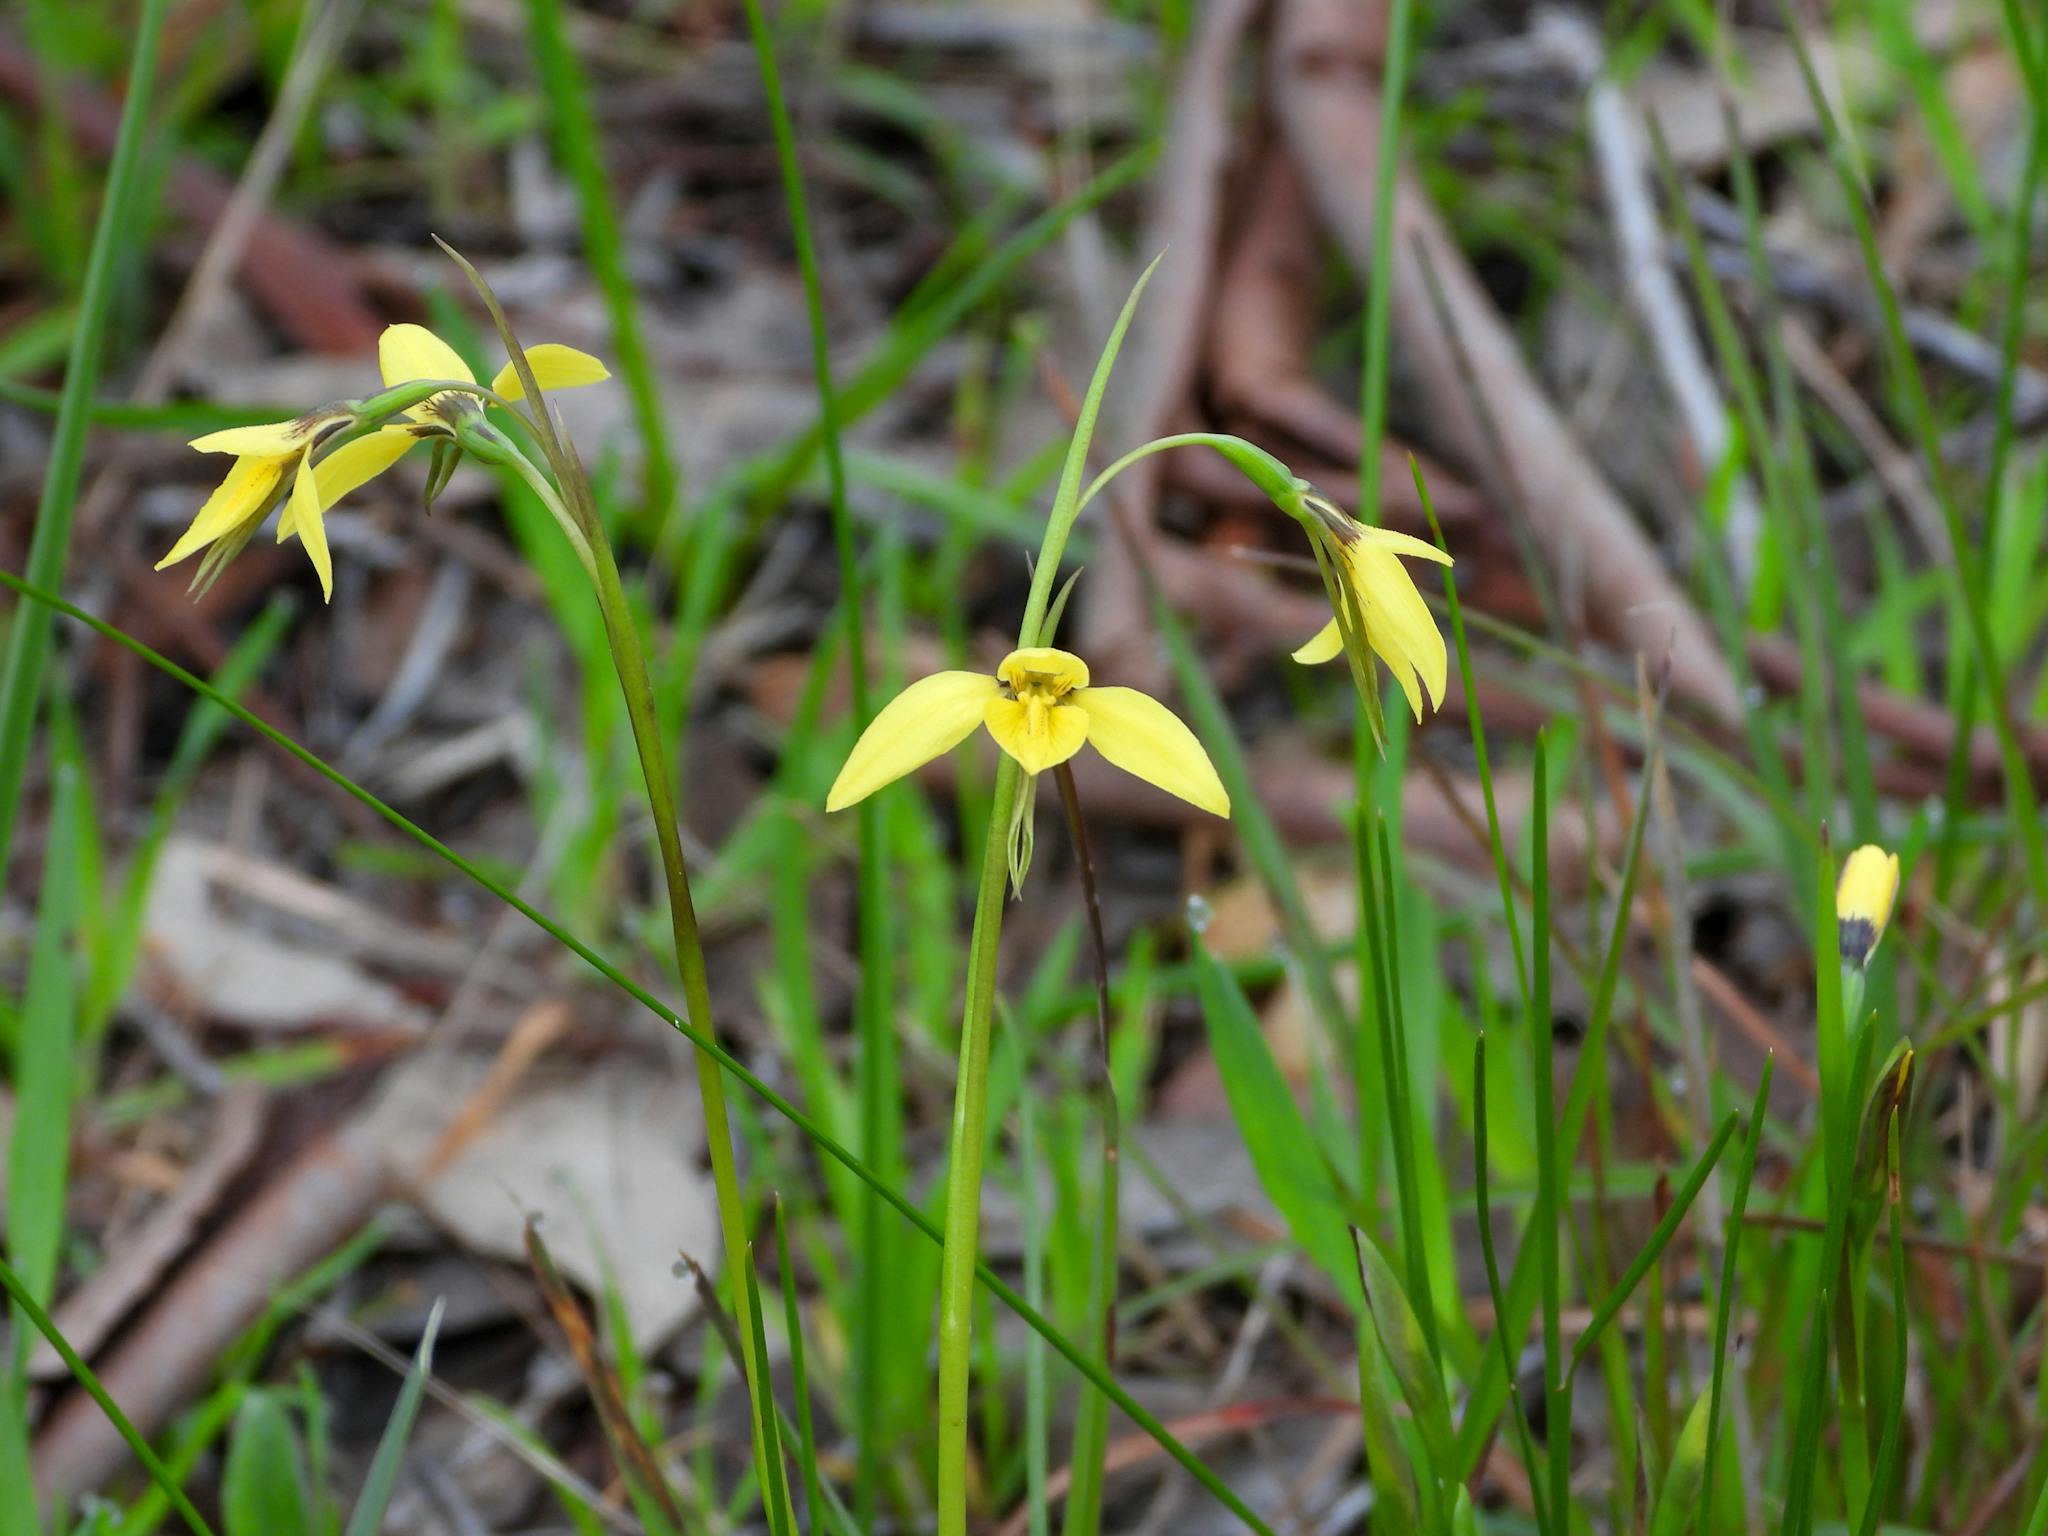 An example of one of the many wildflowers found at Stringybark Reserve